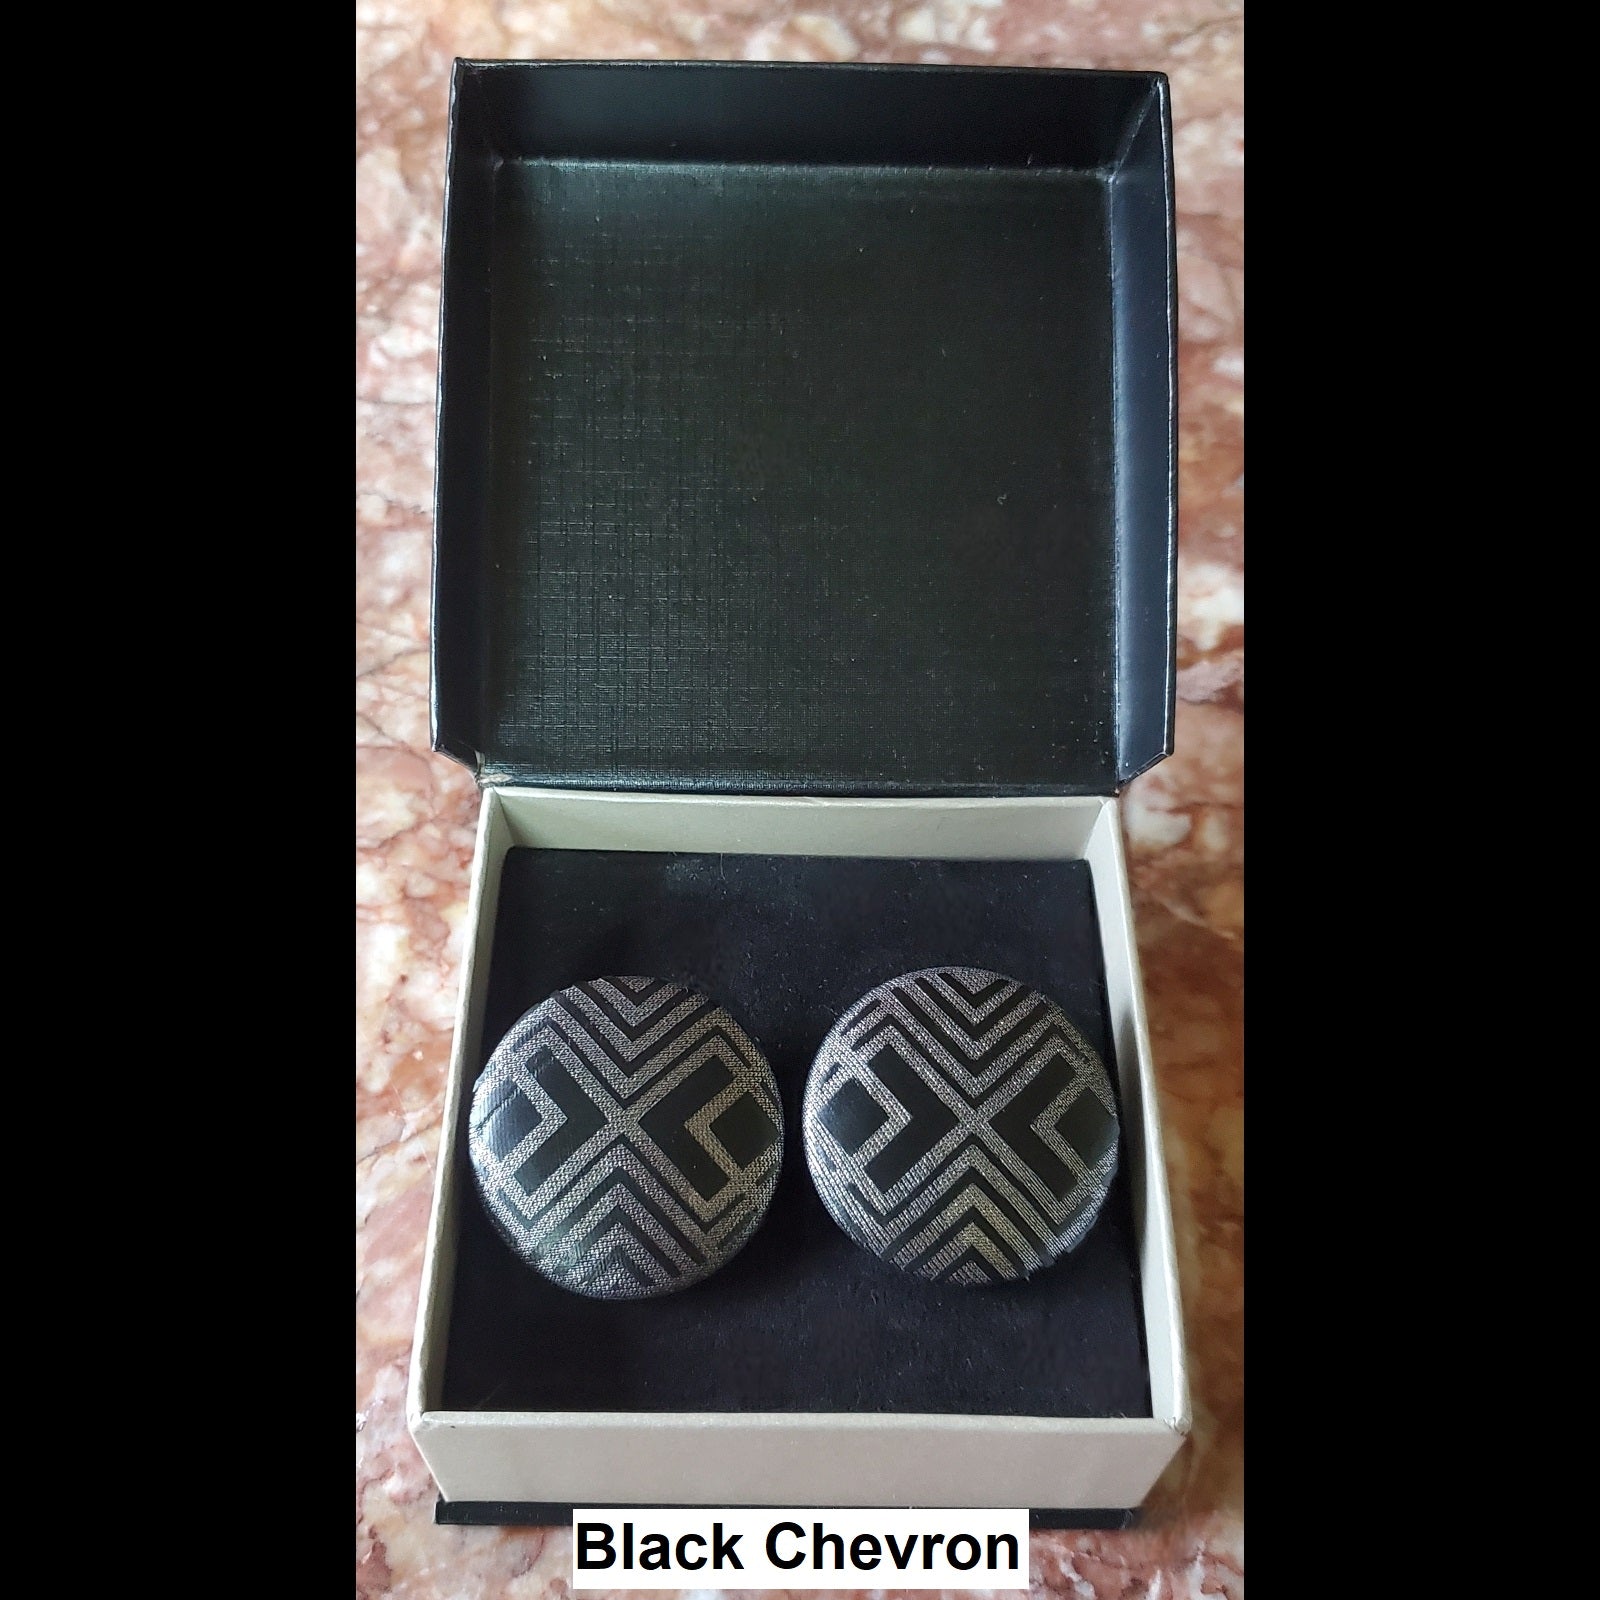 Black and silver chevron print button earrings in jewelry box